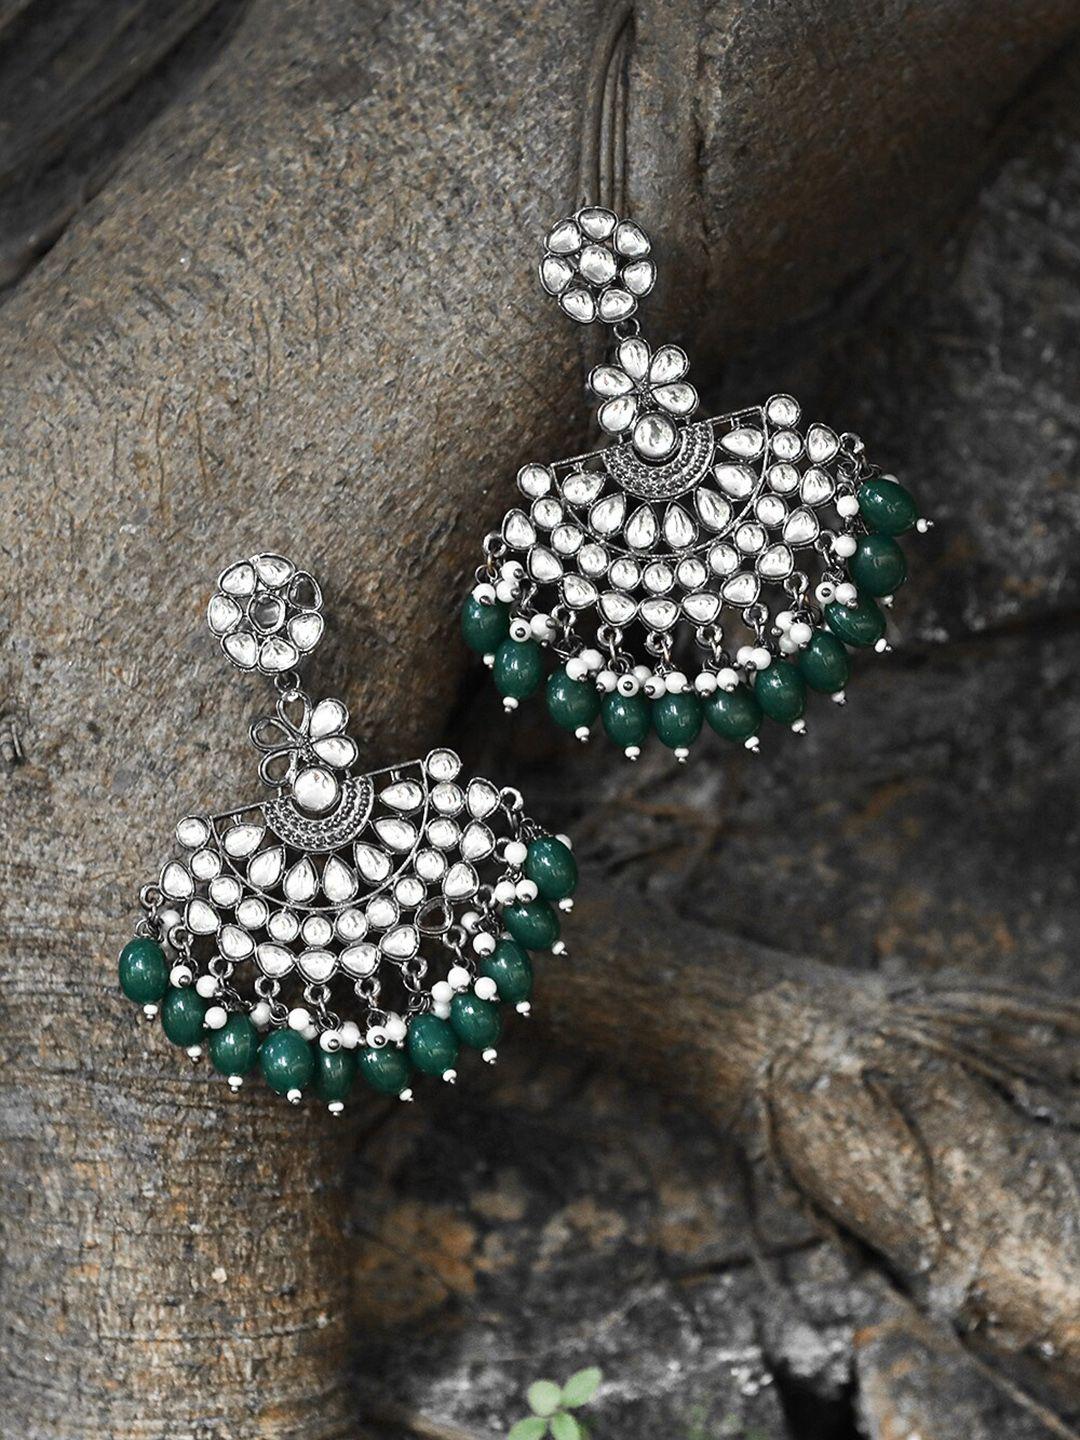 adwitiya collection silver-plated silver-toned & green contemporary jhumkas earrings